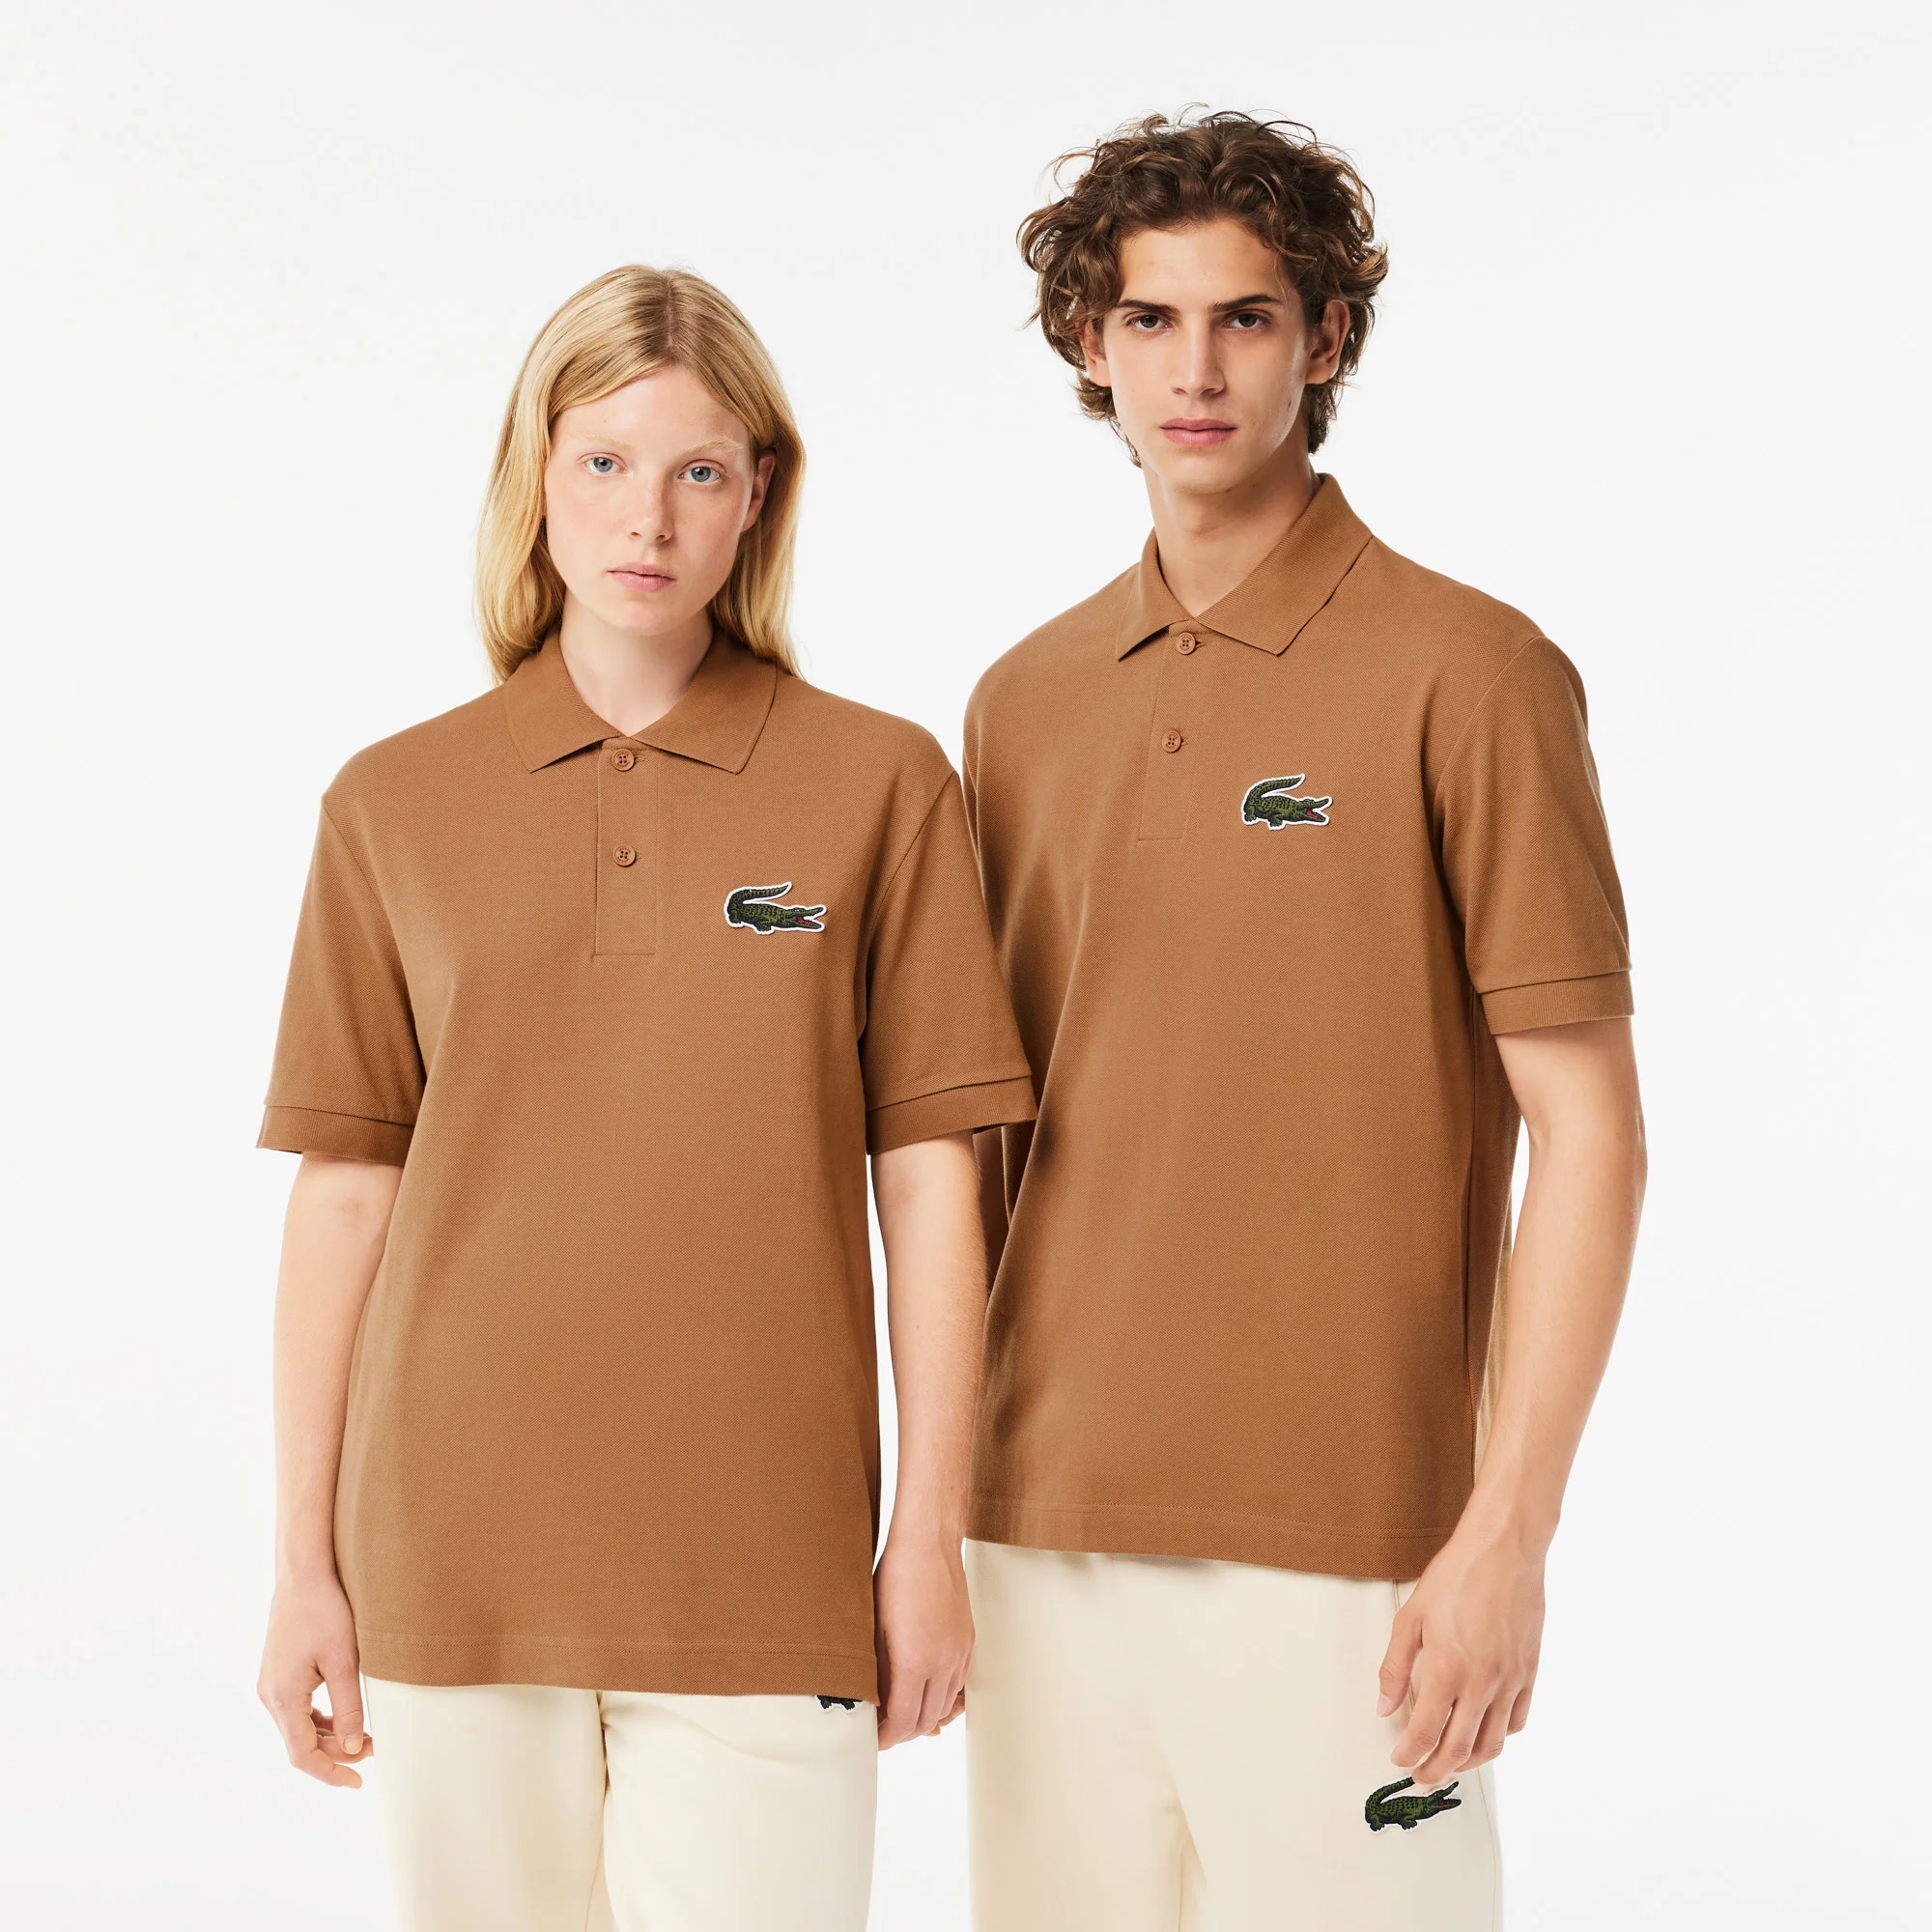 First Versions: Lacoste (polo shirts)